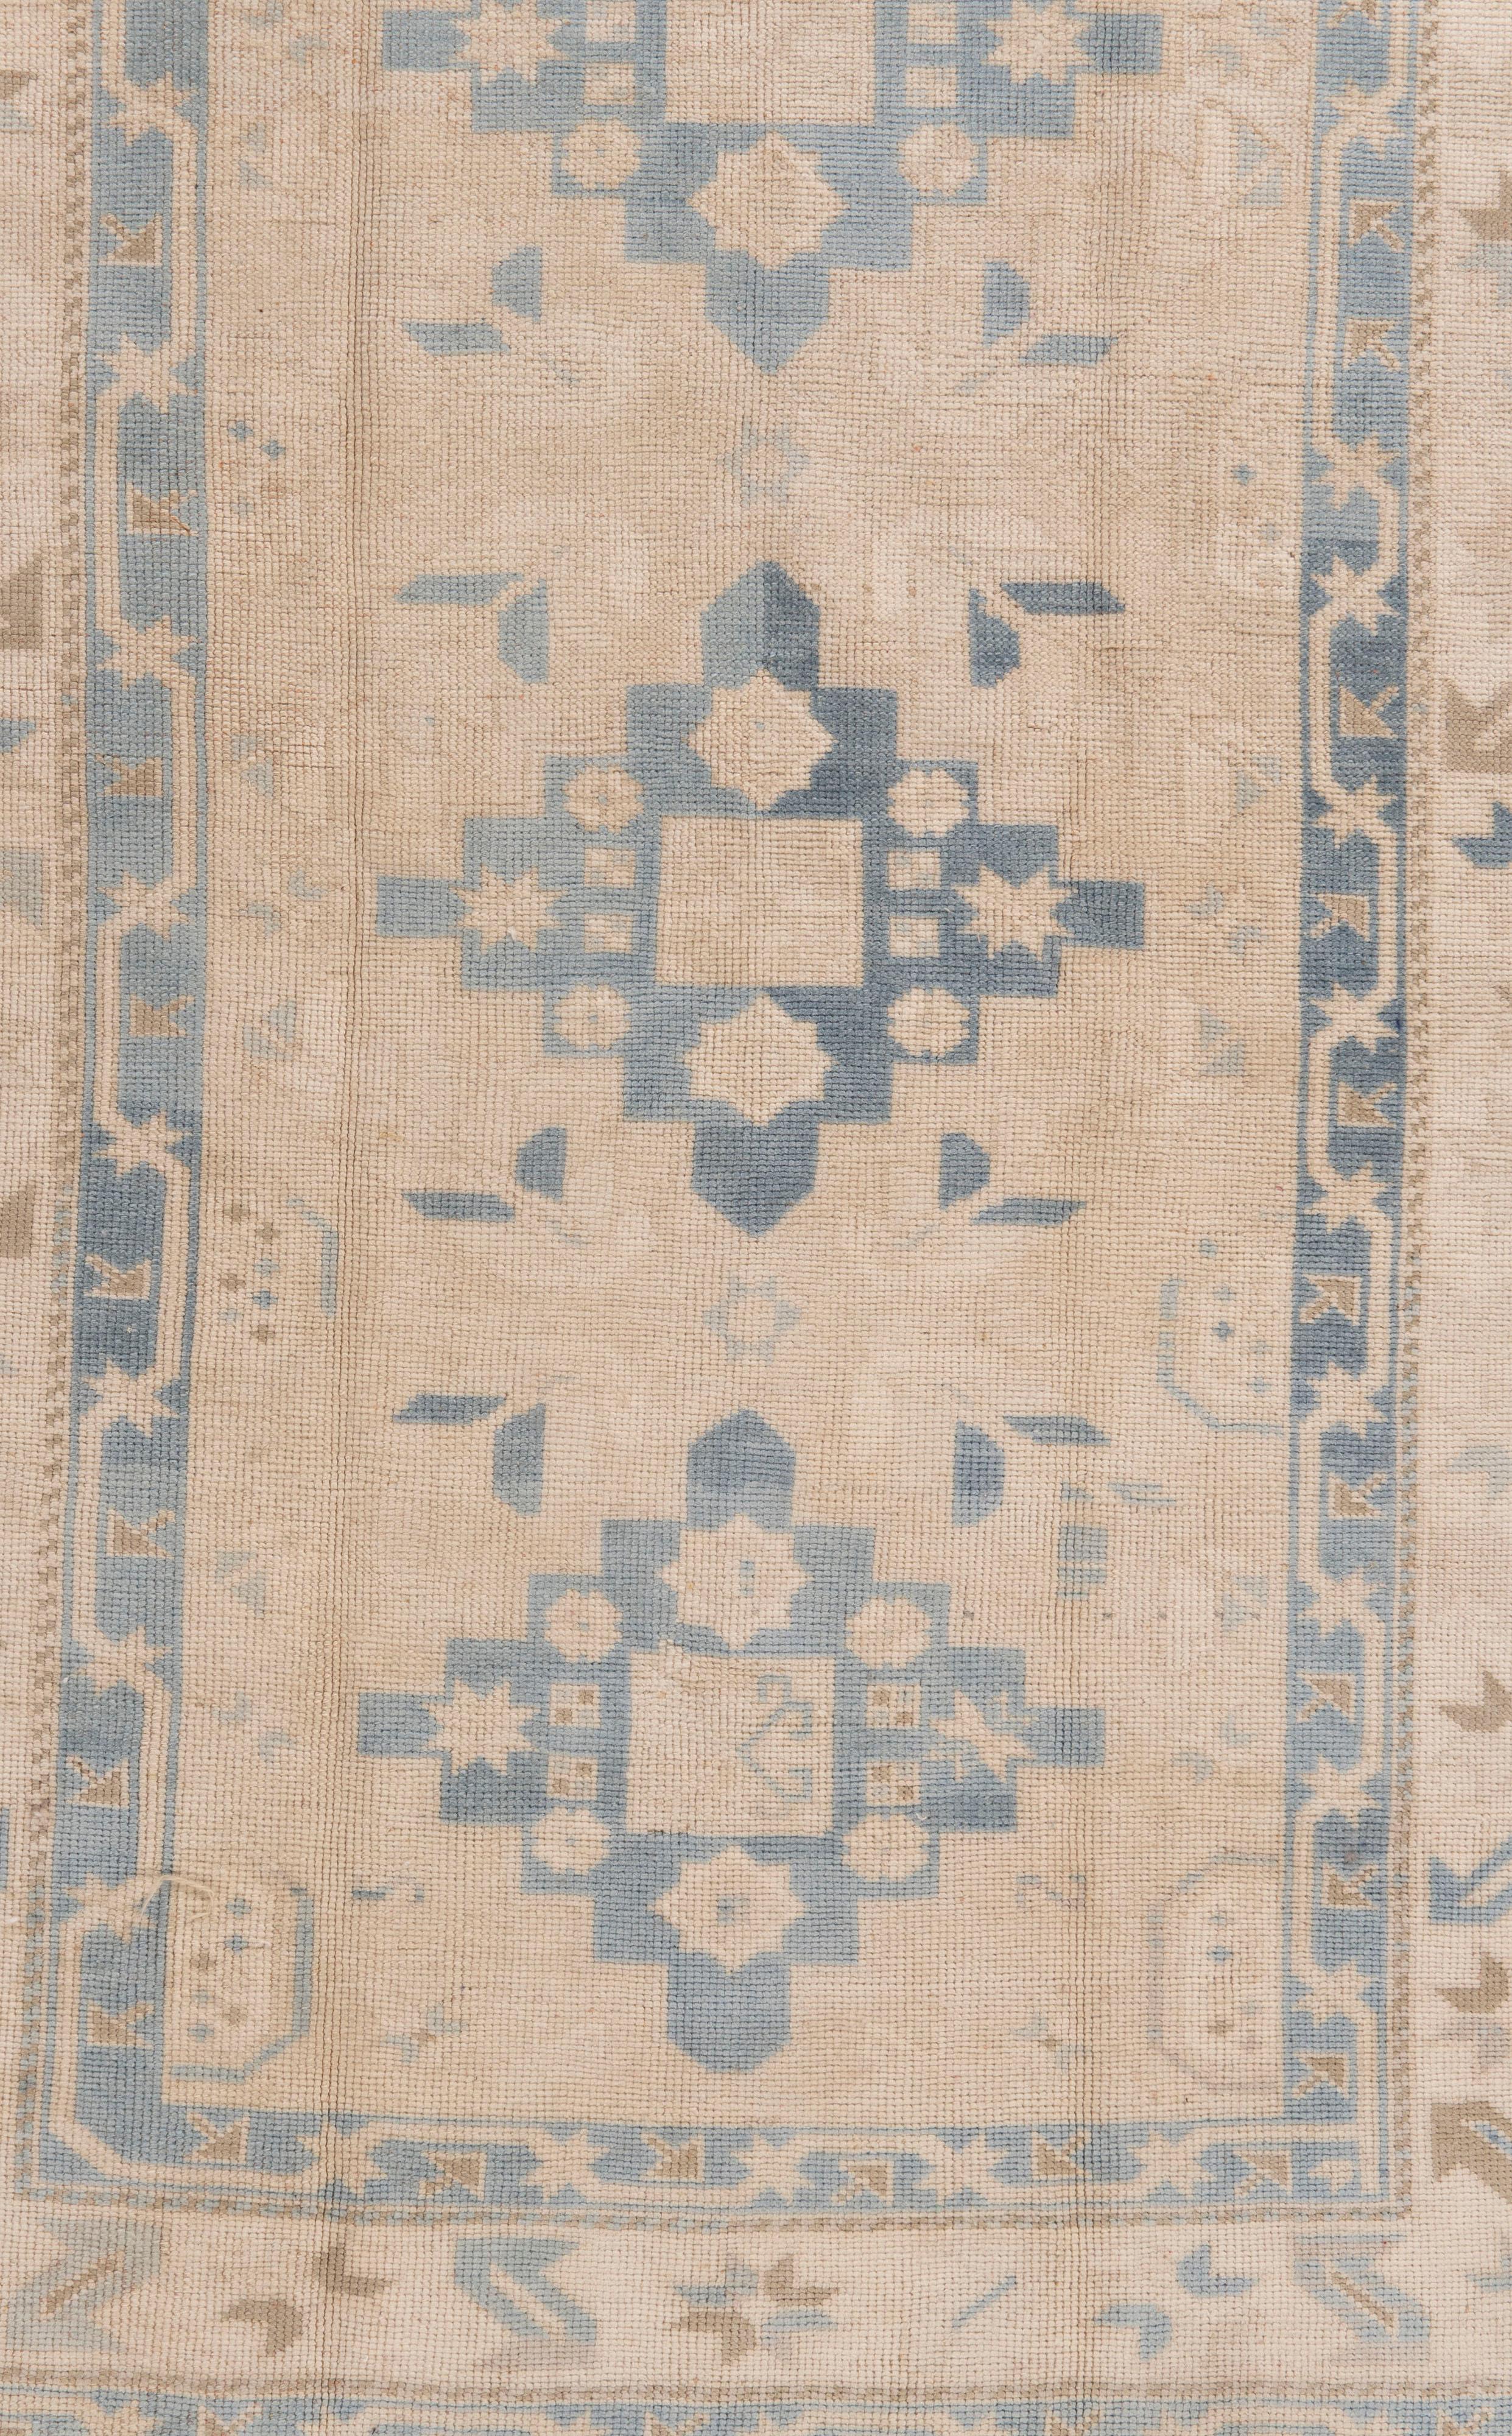 Vintage Turkish Oushak Area rug 4'2 X 6'7. These attractive rugs are suitable for a wide variety of places, but the significant effect of Oushaks is that they bring space together, making it cozy and warm. The artistic technique of weaving Oushak's